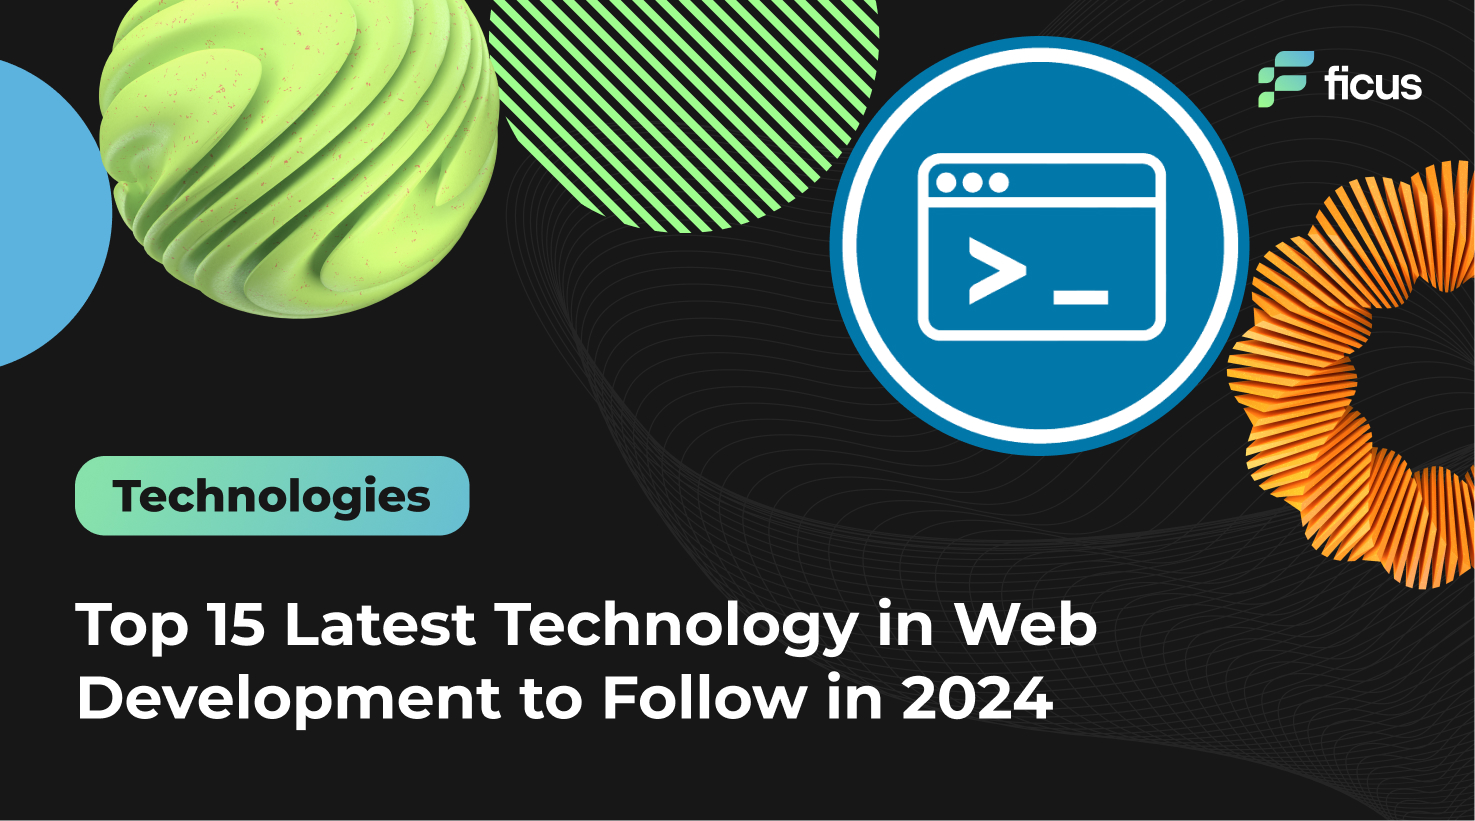 Top-15-Latest-Technology-in-Web-Development-to-Follow-in-2024